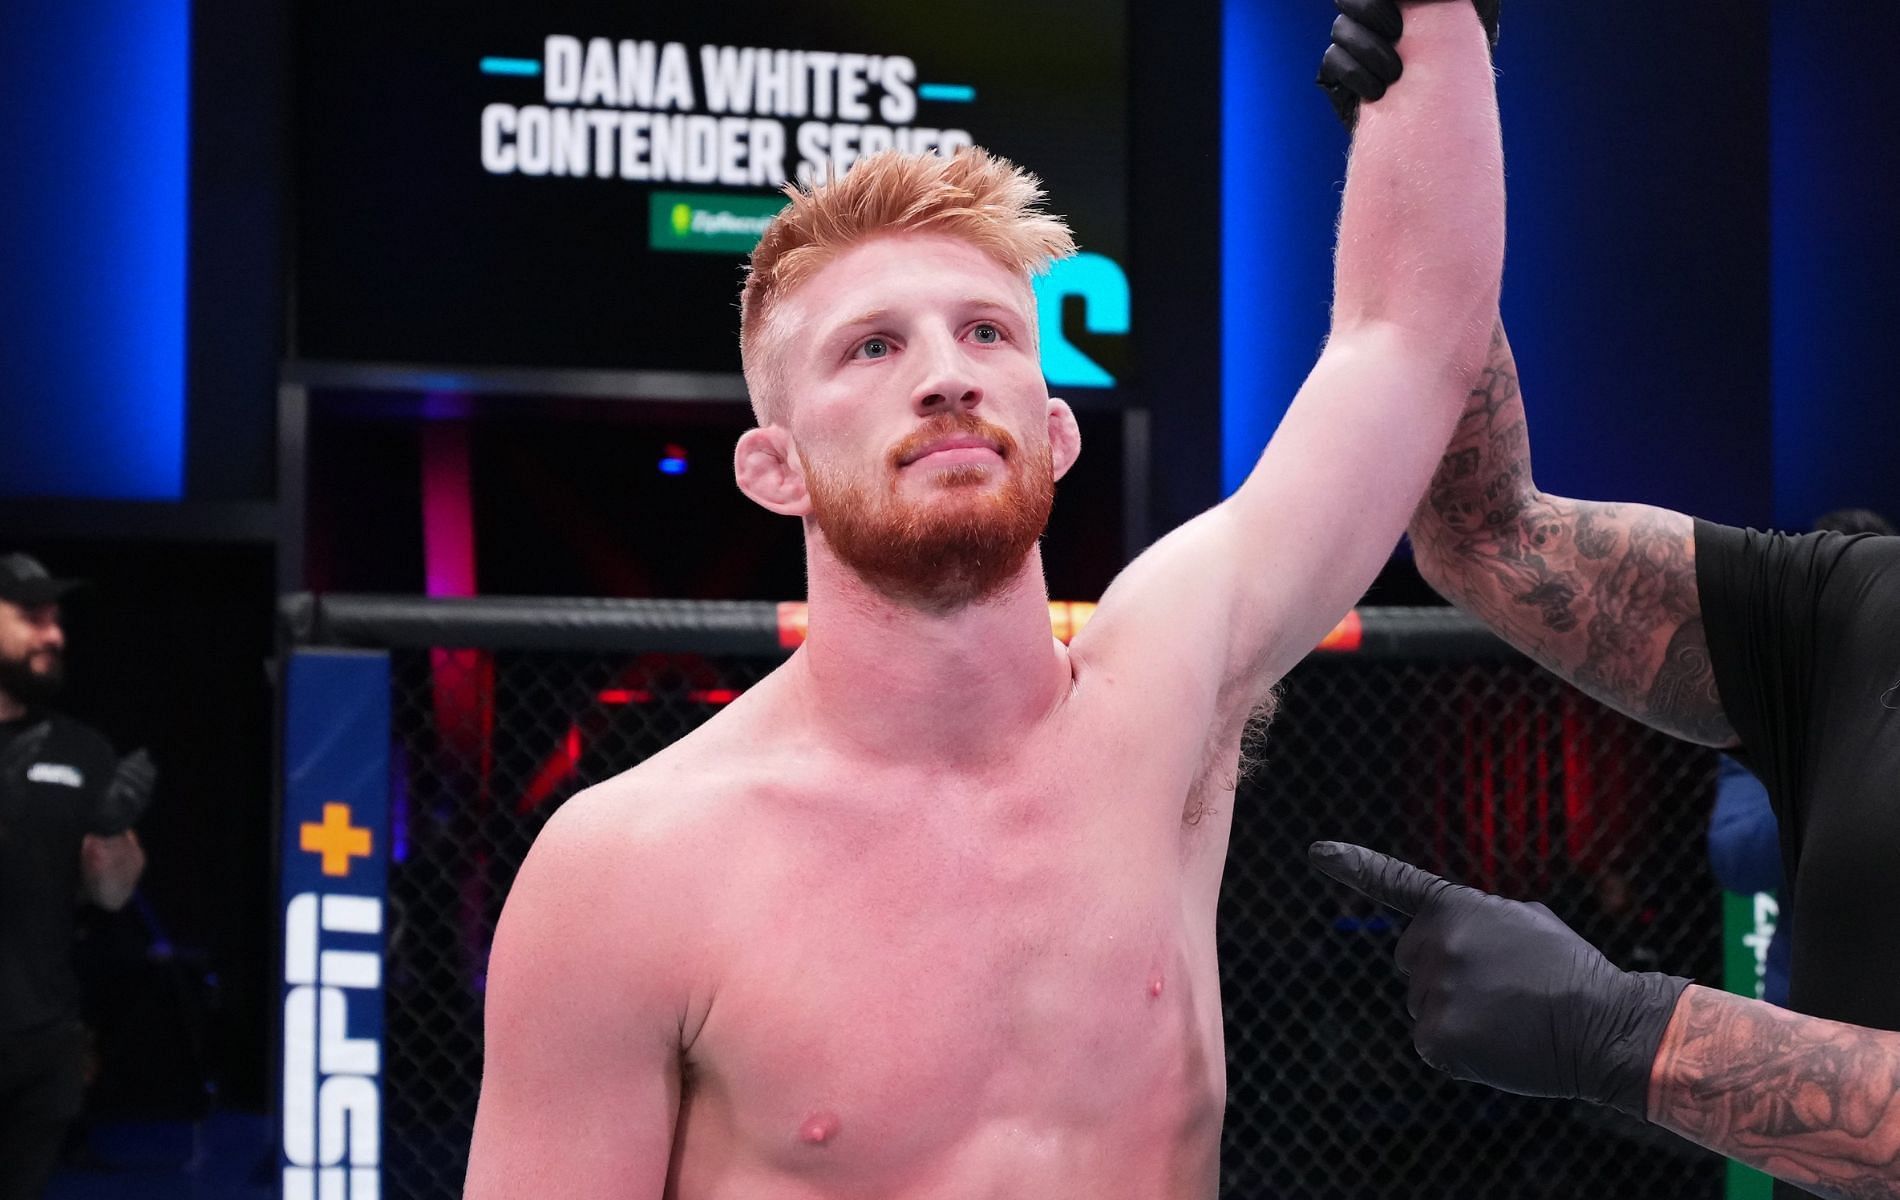 Bo Nickal during his first win at the Dana White